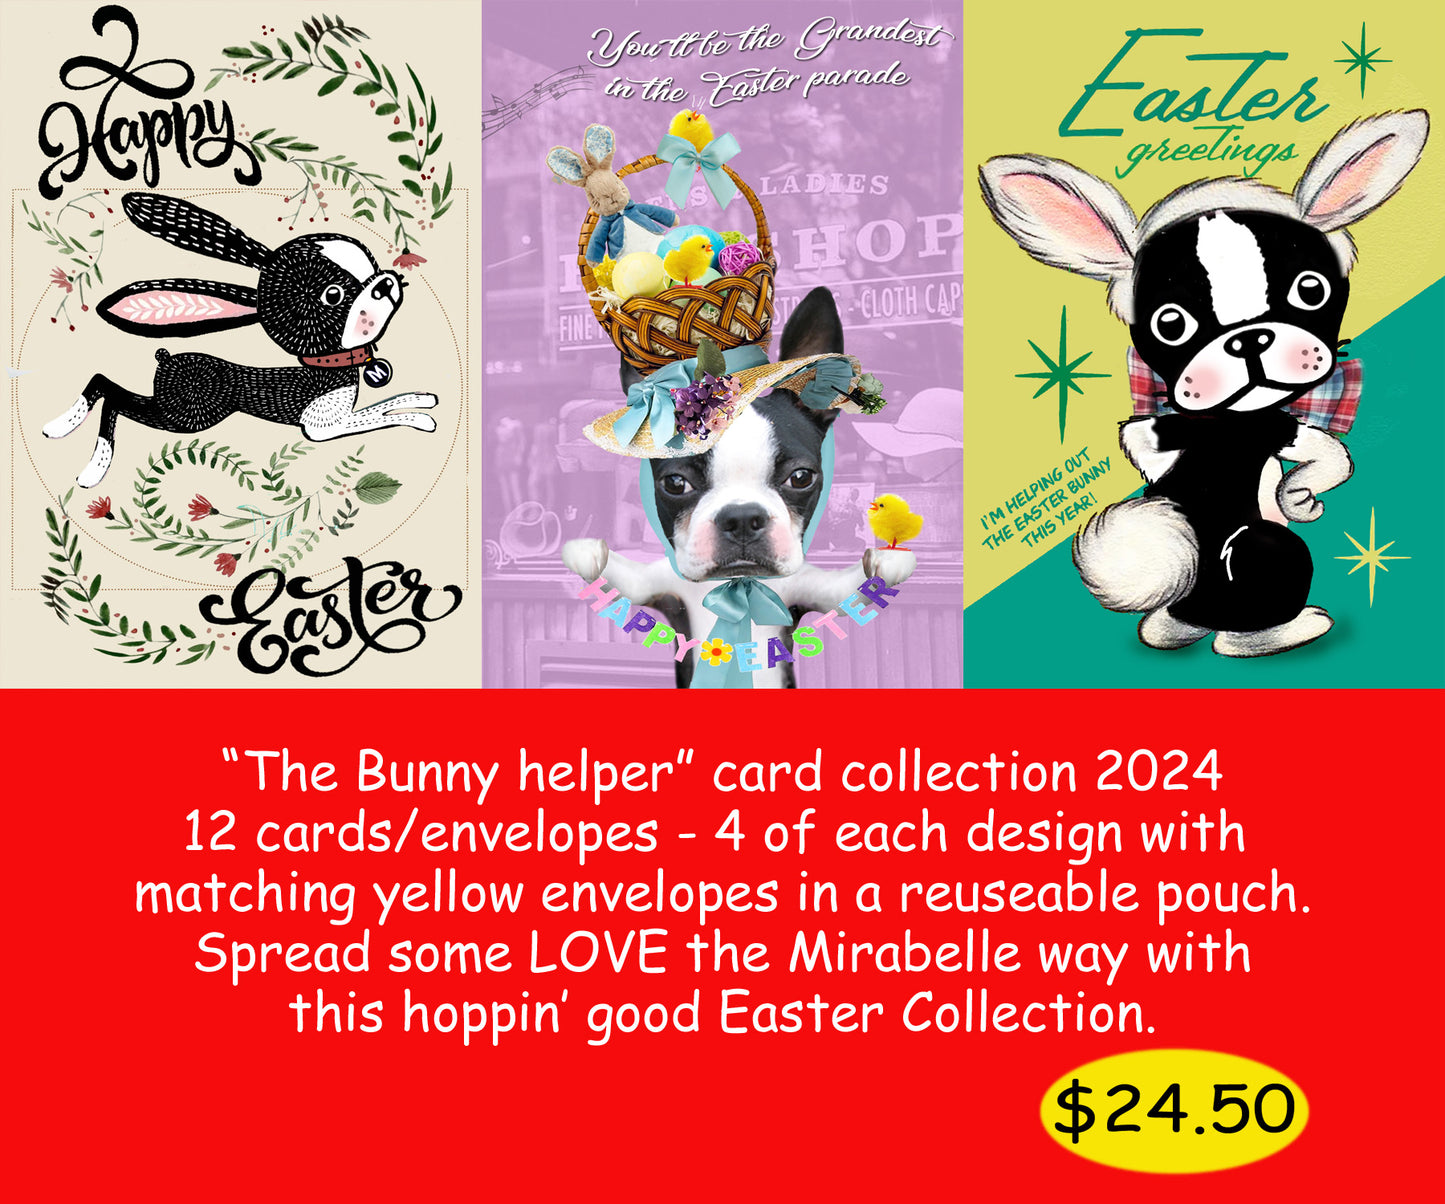 The Bunny Helper Easter Greeting collection 2024